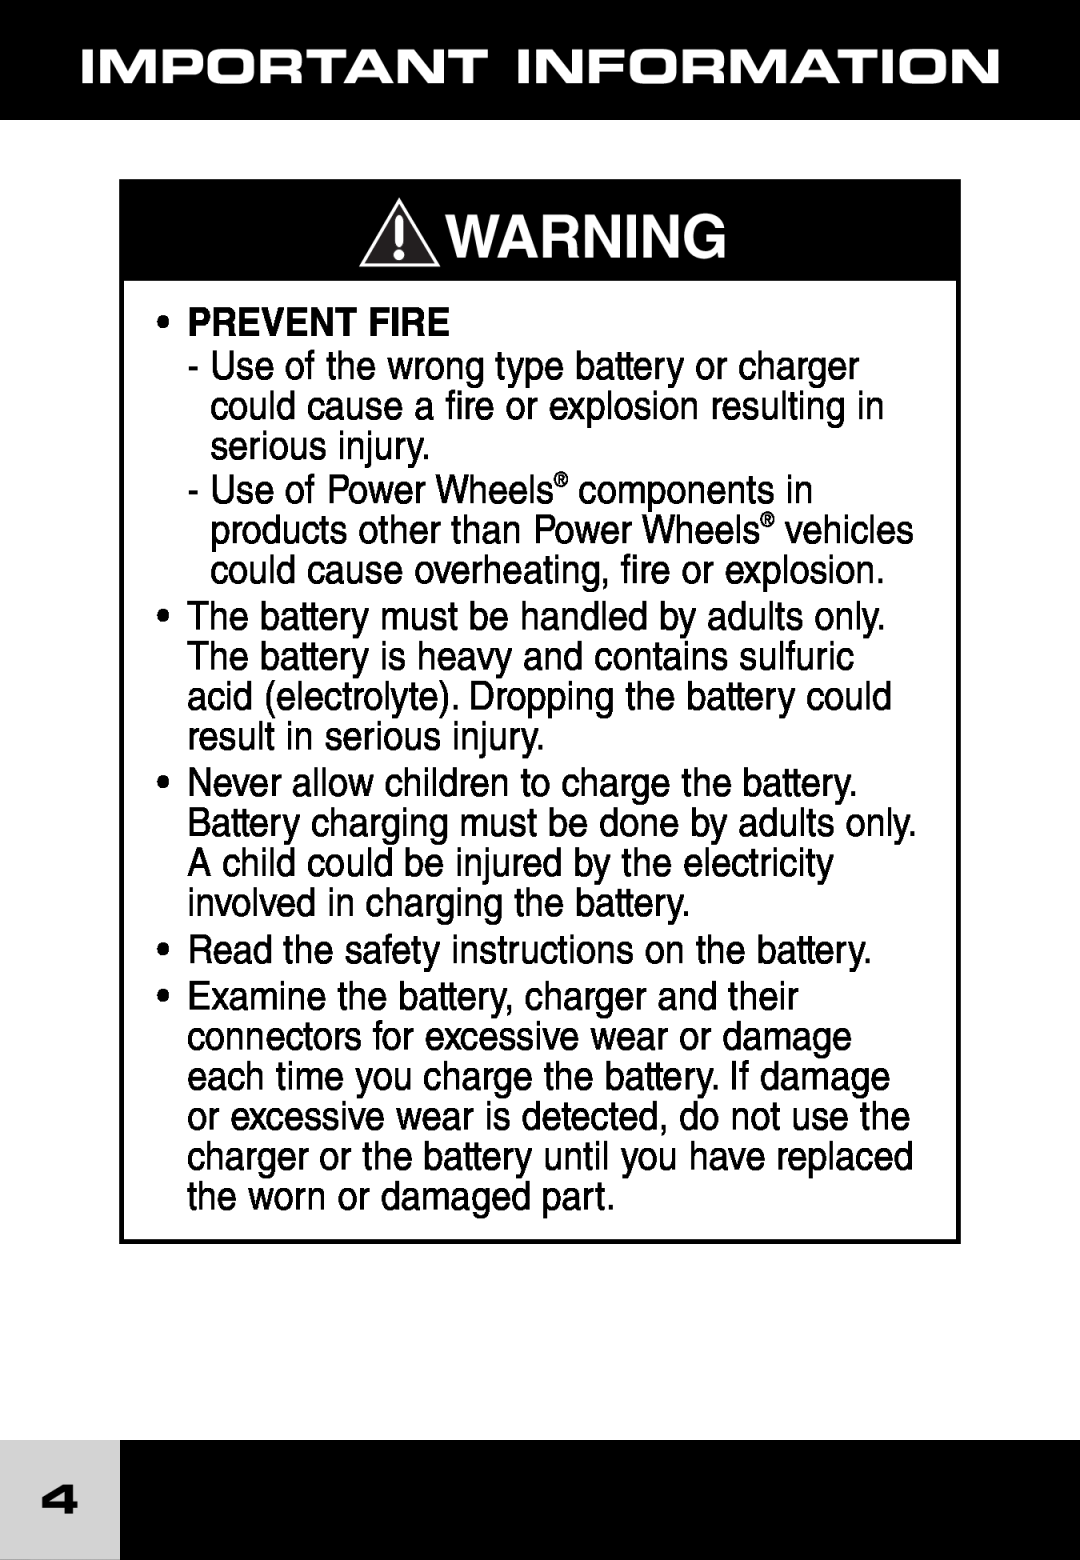 Fisher-Price J1718, H7461 important safety instructions Prevent Fire, Important Information 